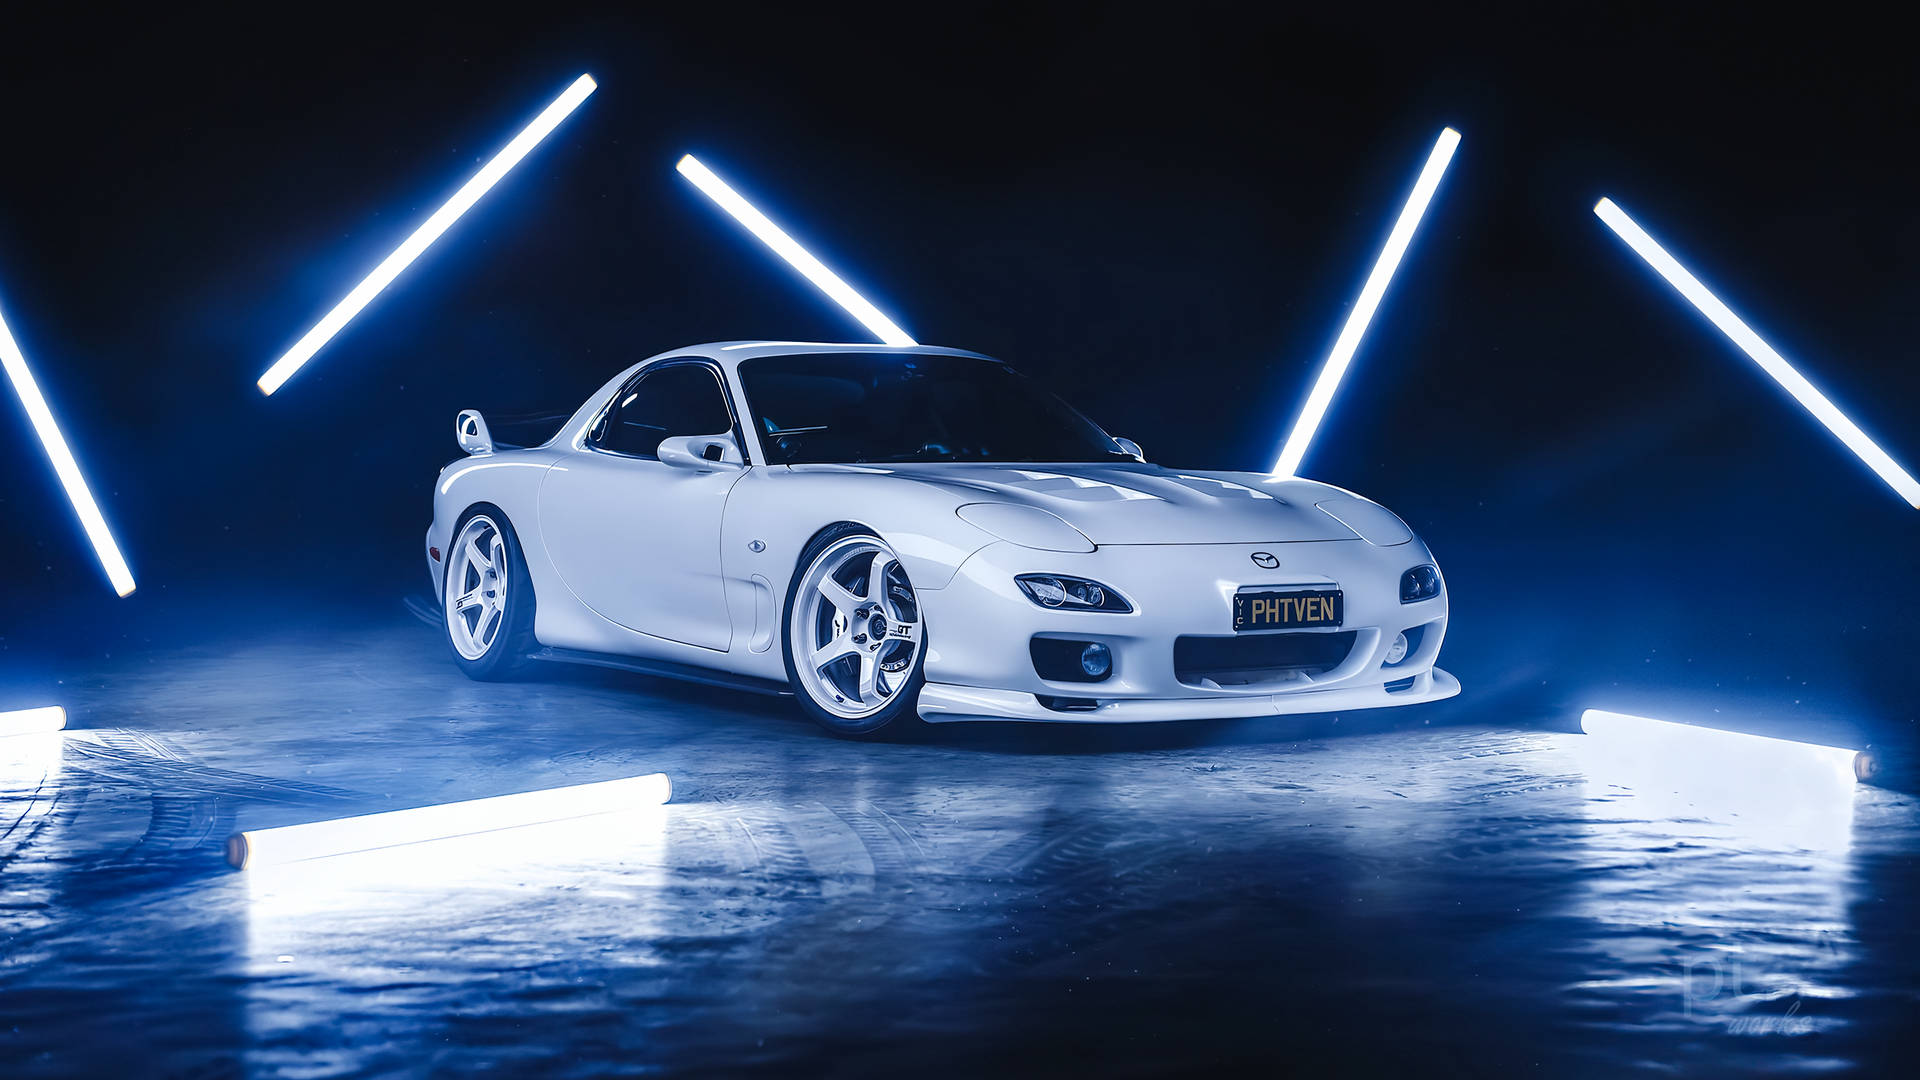 Rx7 Background Wallpaper